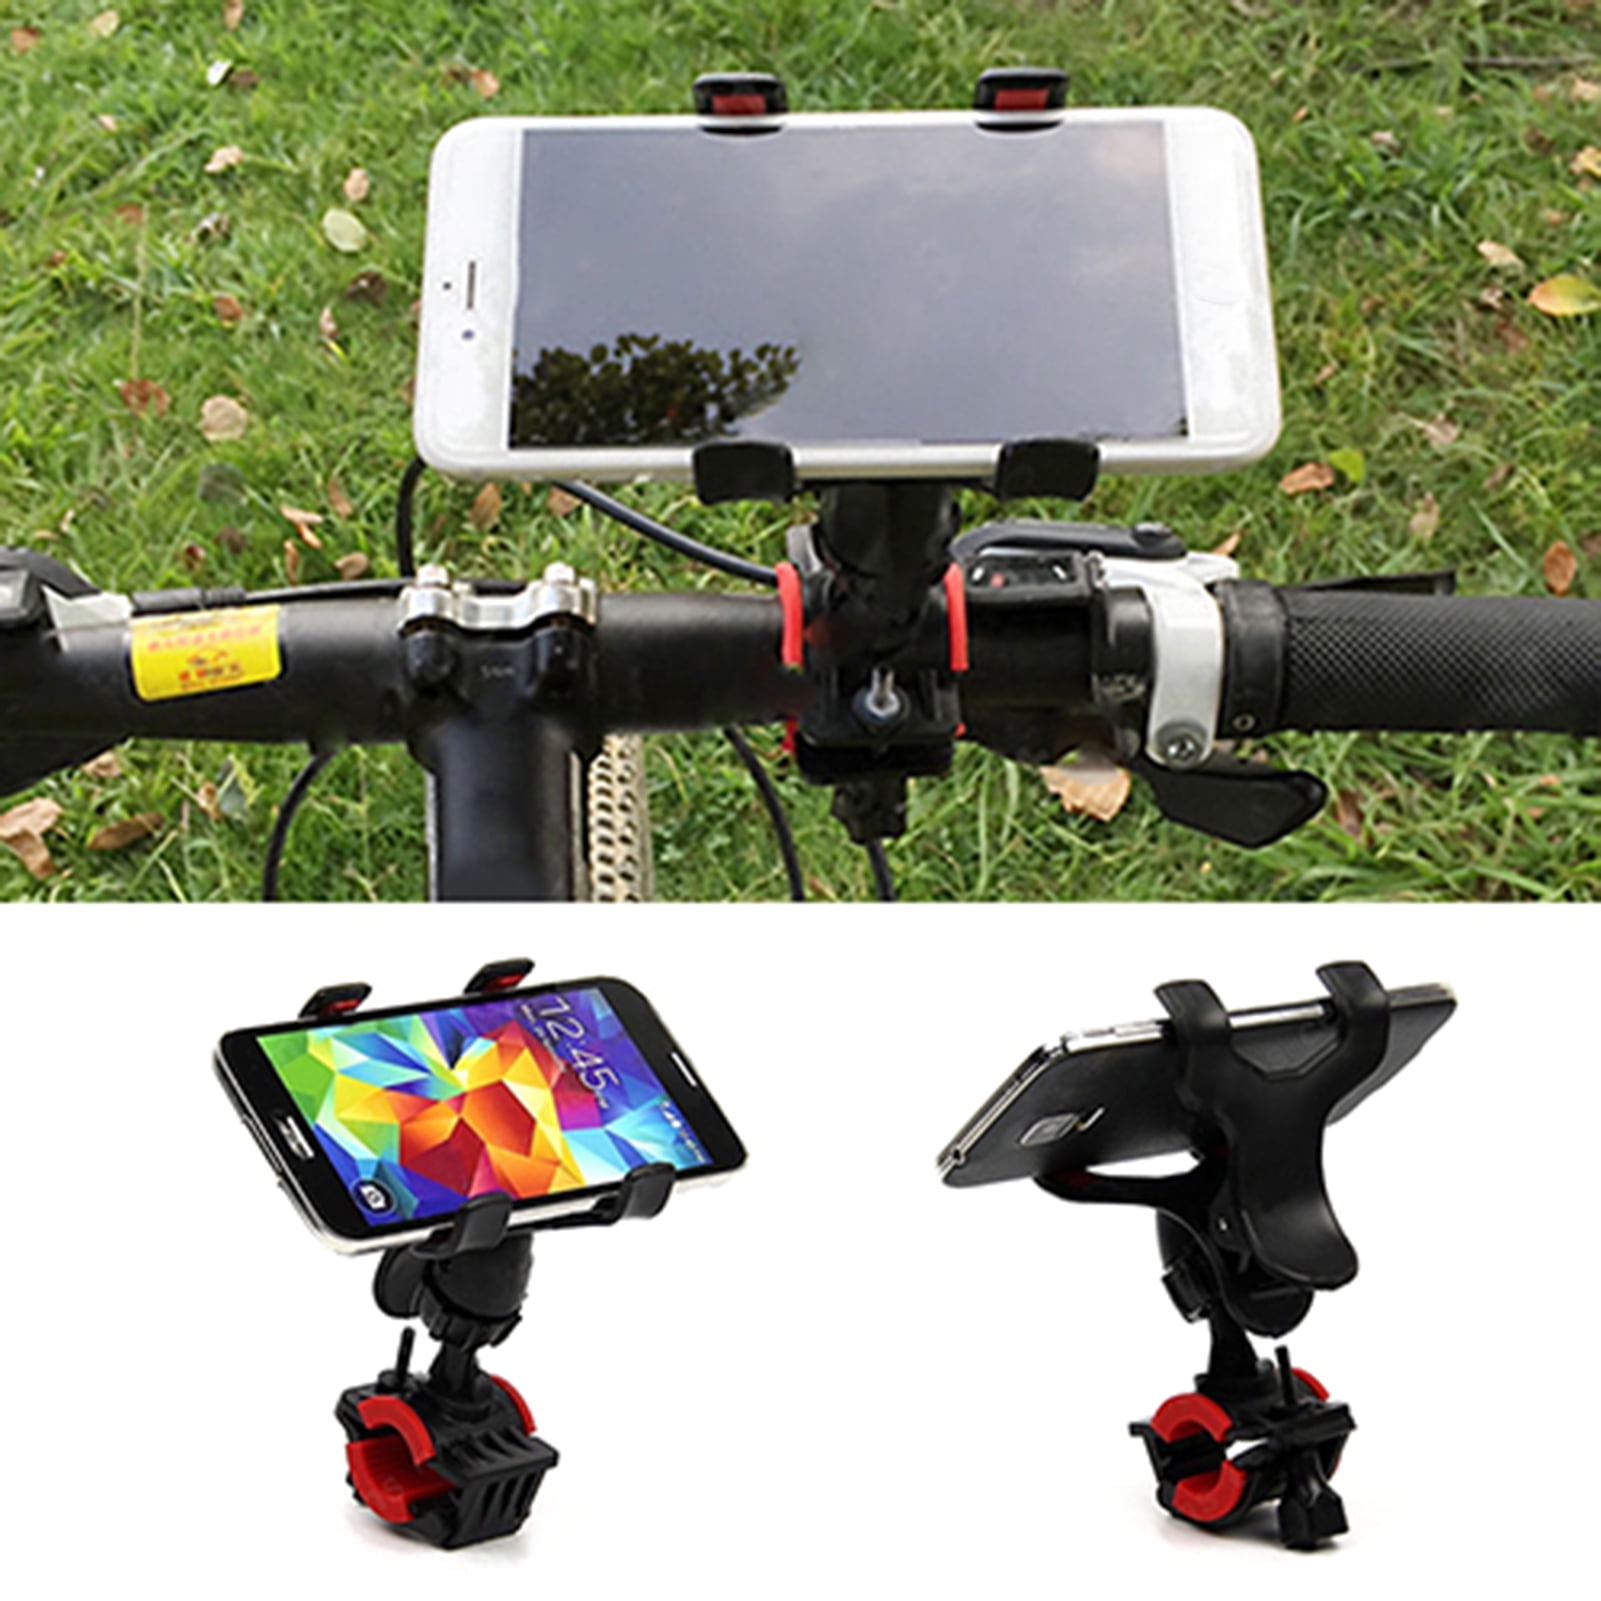 1*Motorcycle MTB Bicycle Bike Handlebar Mount Holder Silicone For Cell Phone GPS 